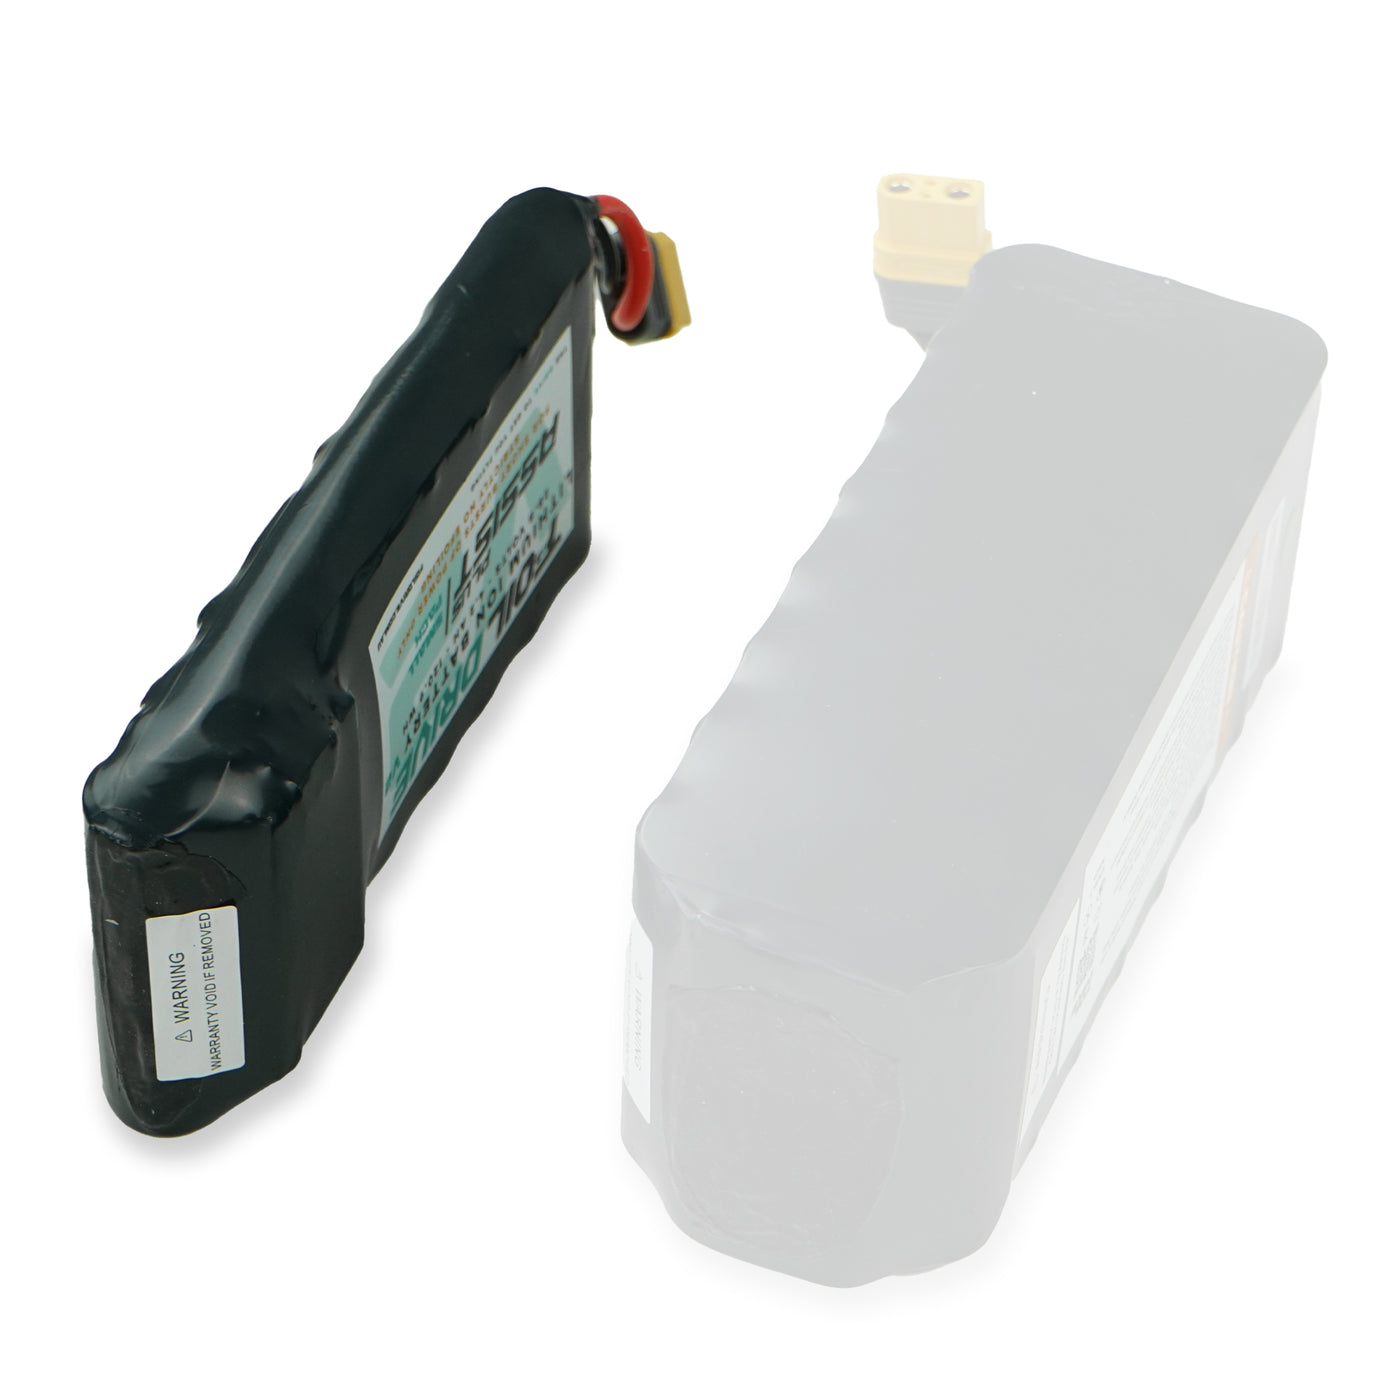    Foil-Drive-Assist-PLUS-V2-Small-Battery-S22-5 - Compared to Standard Battery